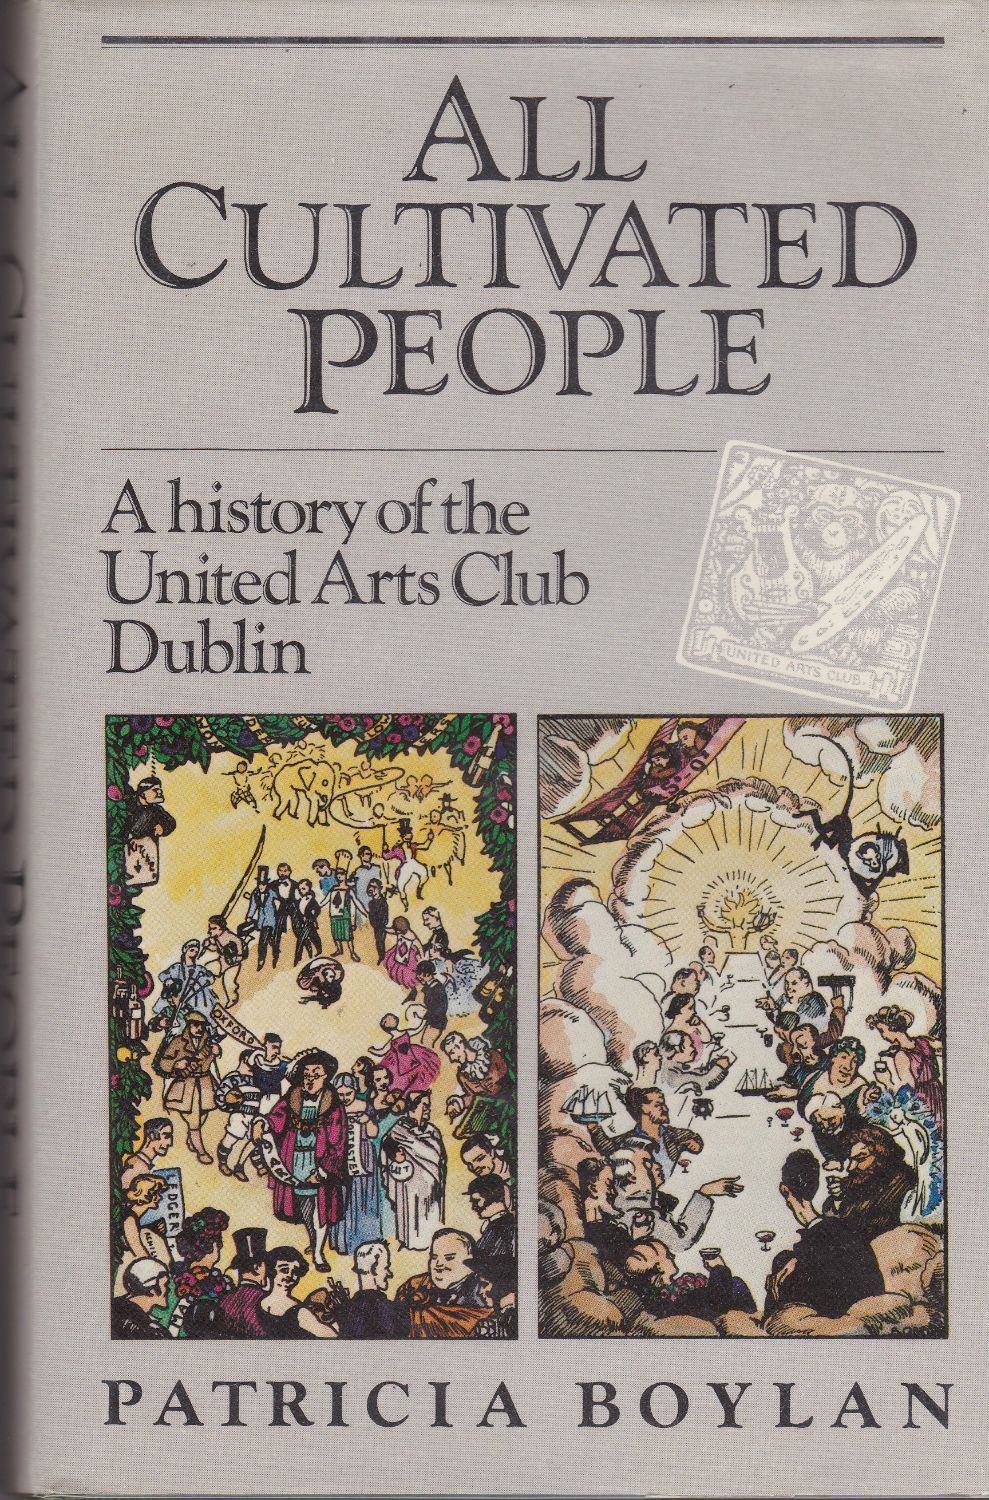 All cultivated people : a history of the United Arts Club, Dublin.